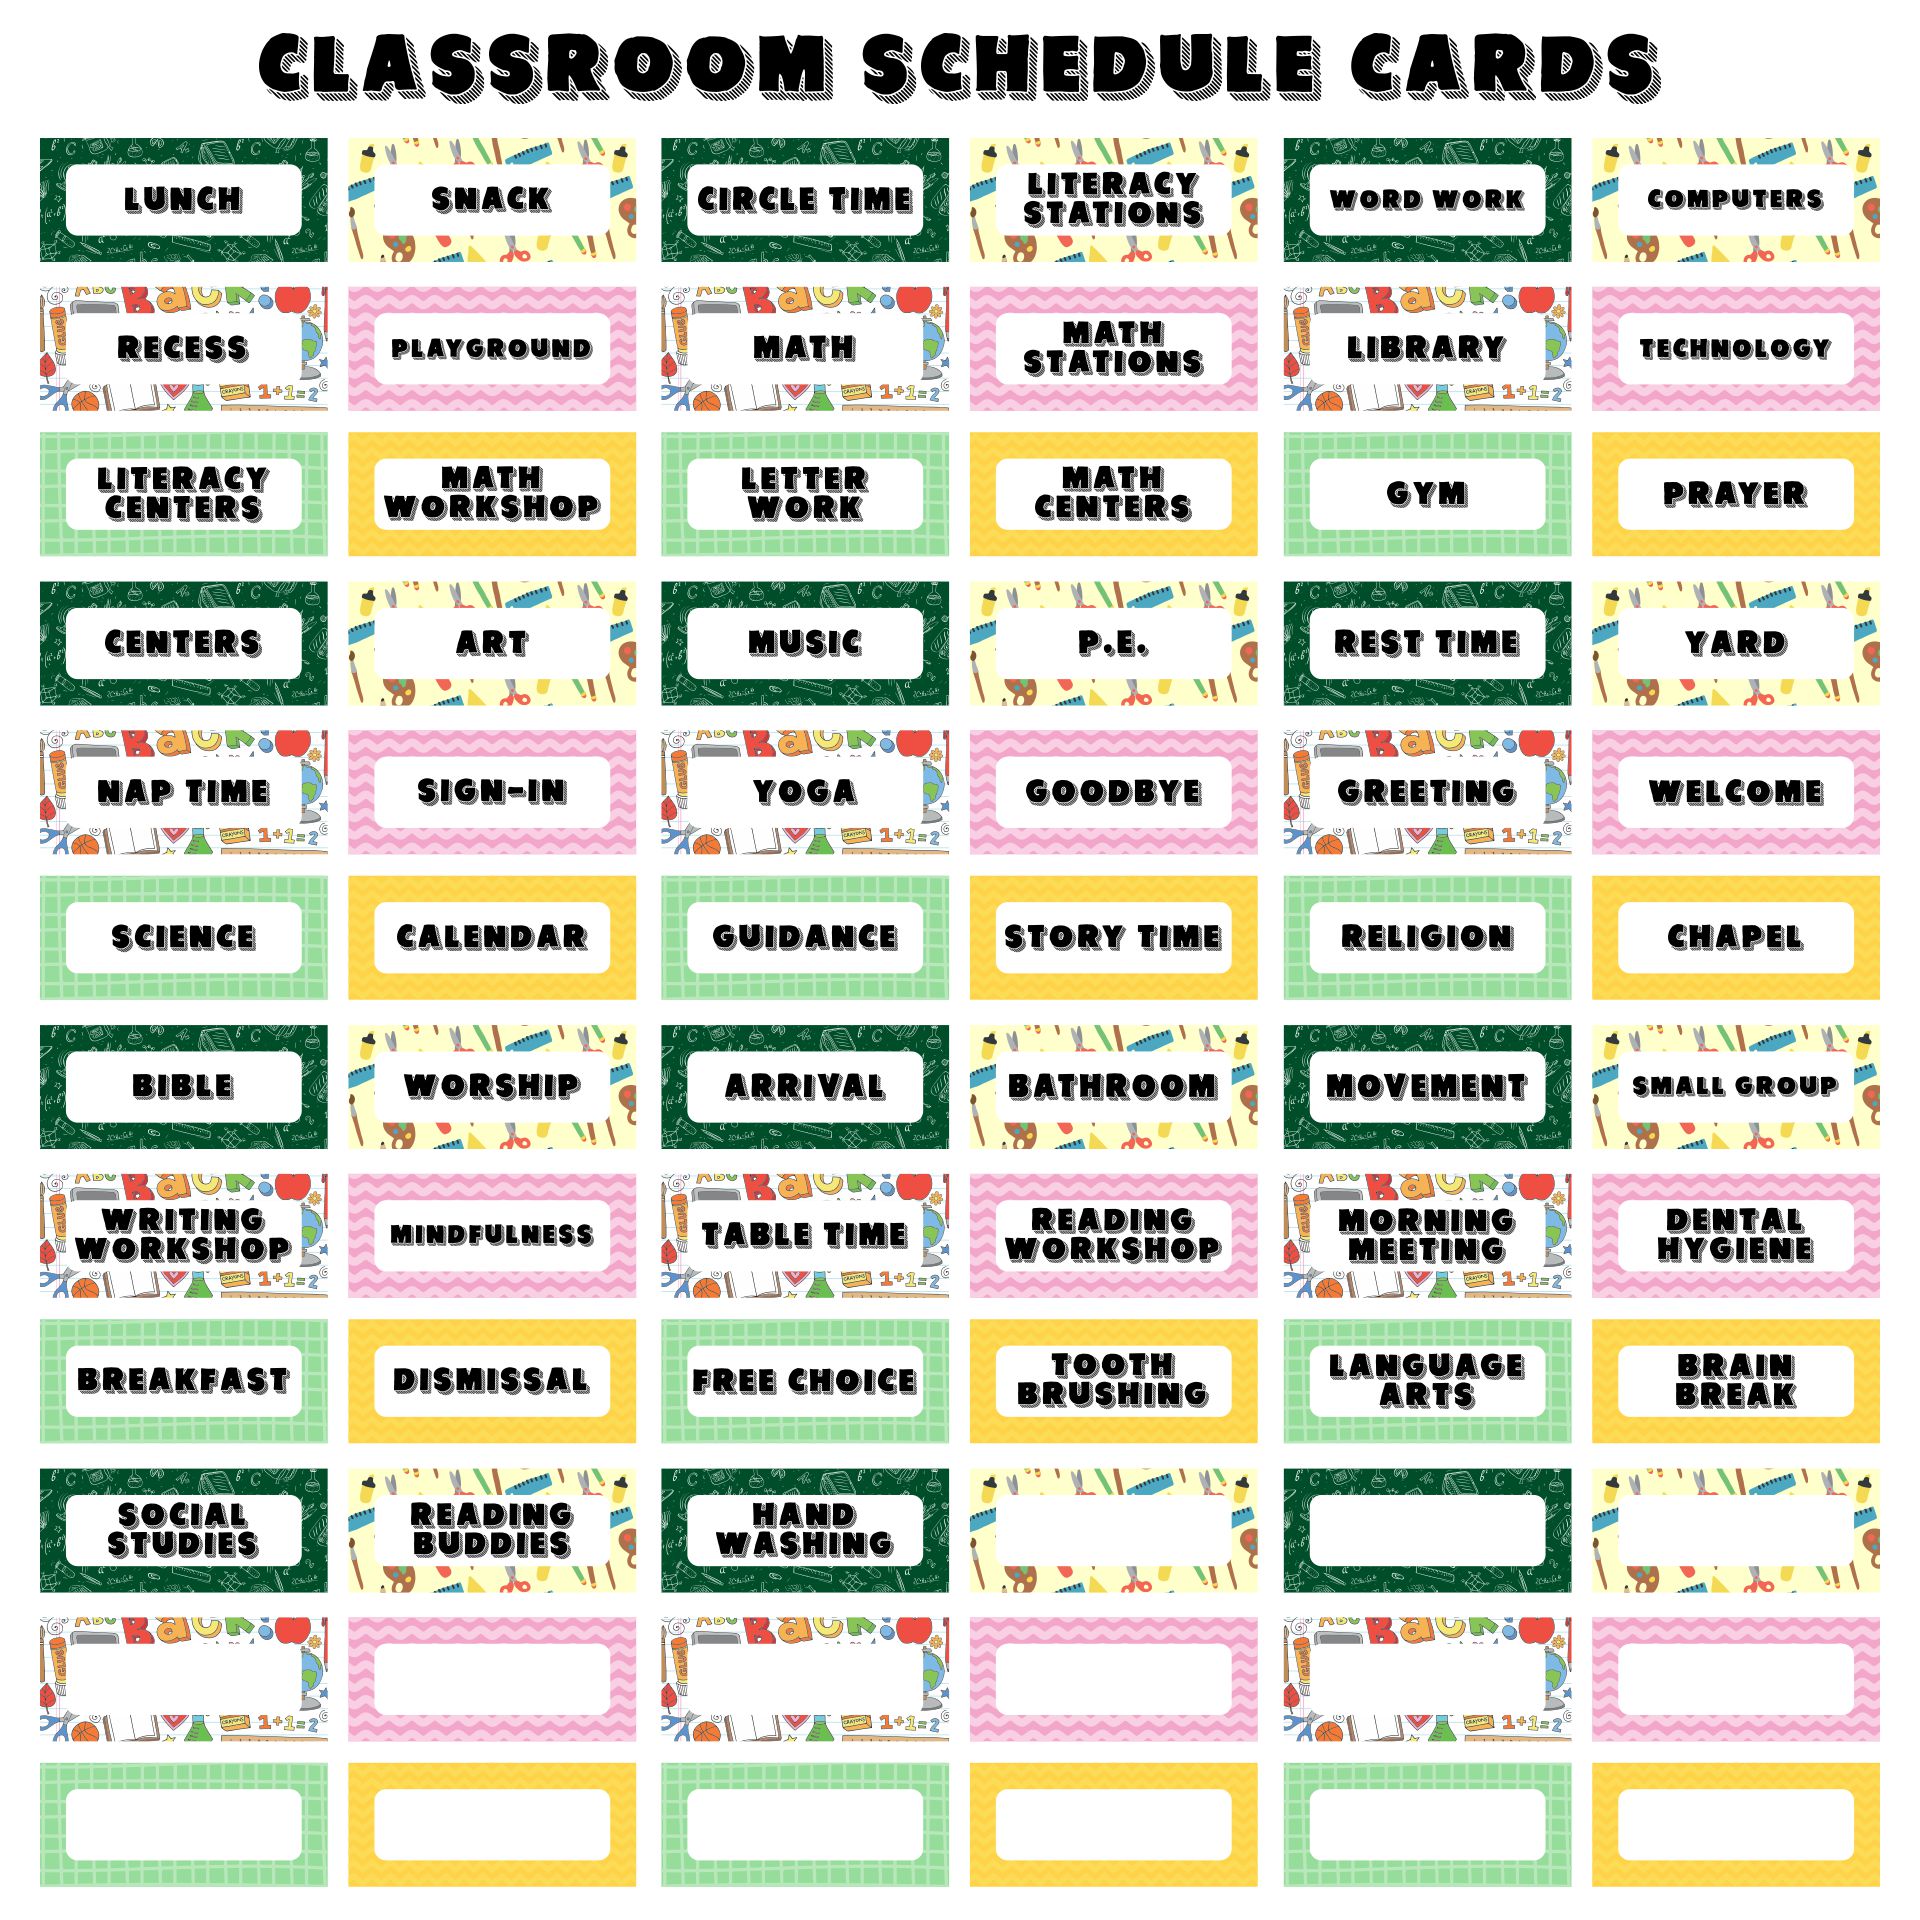 schedule-printable-images-gallery-category-page-2-printablee